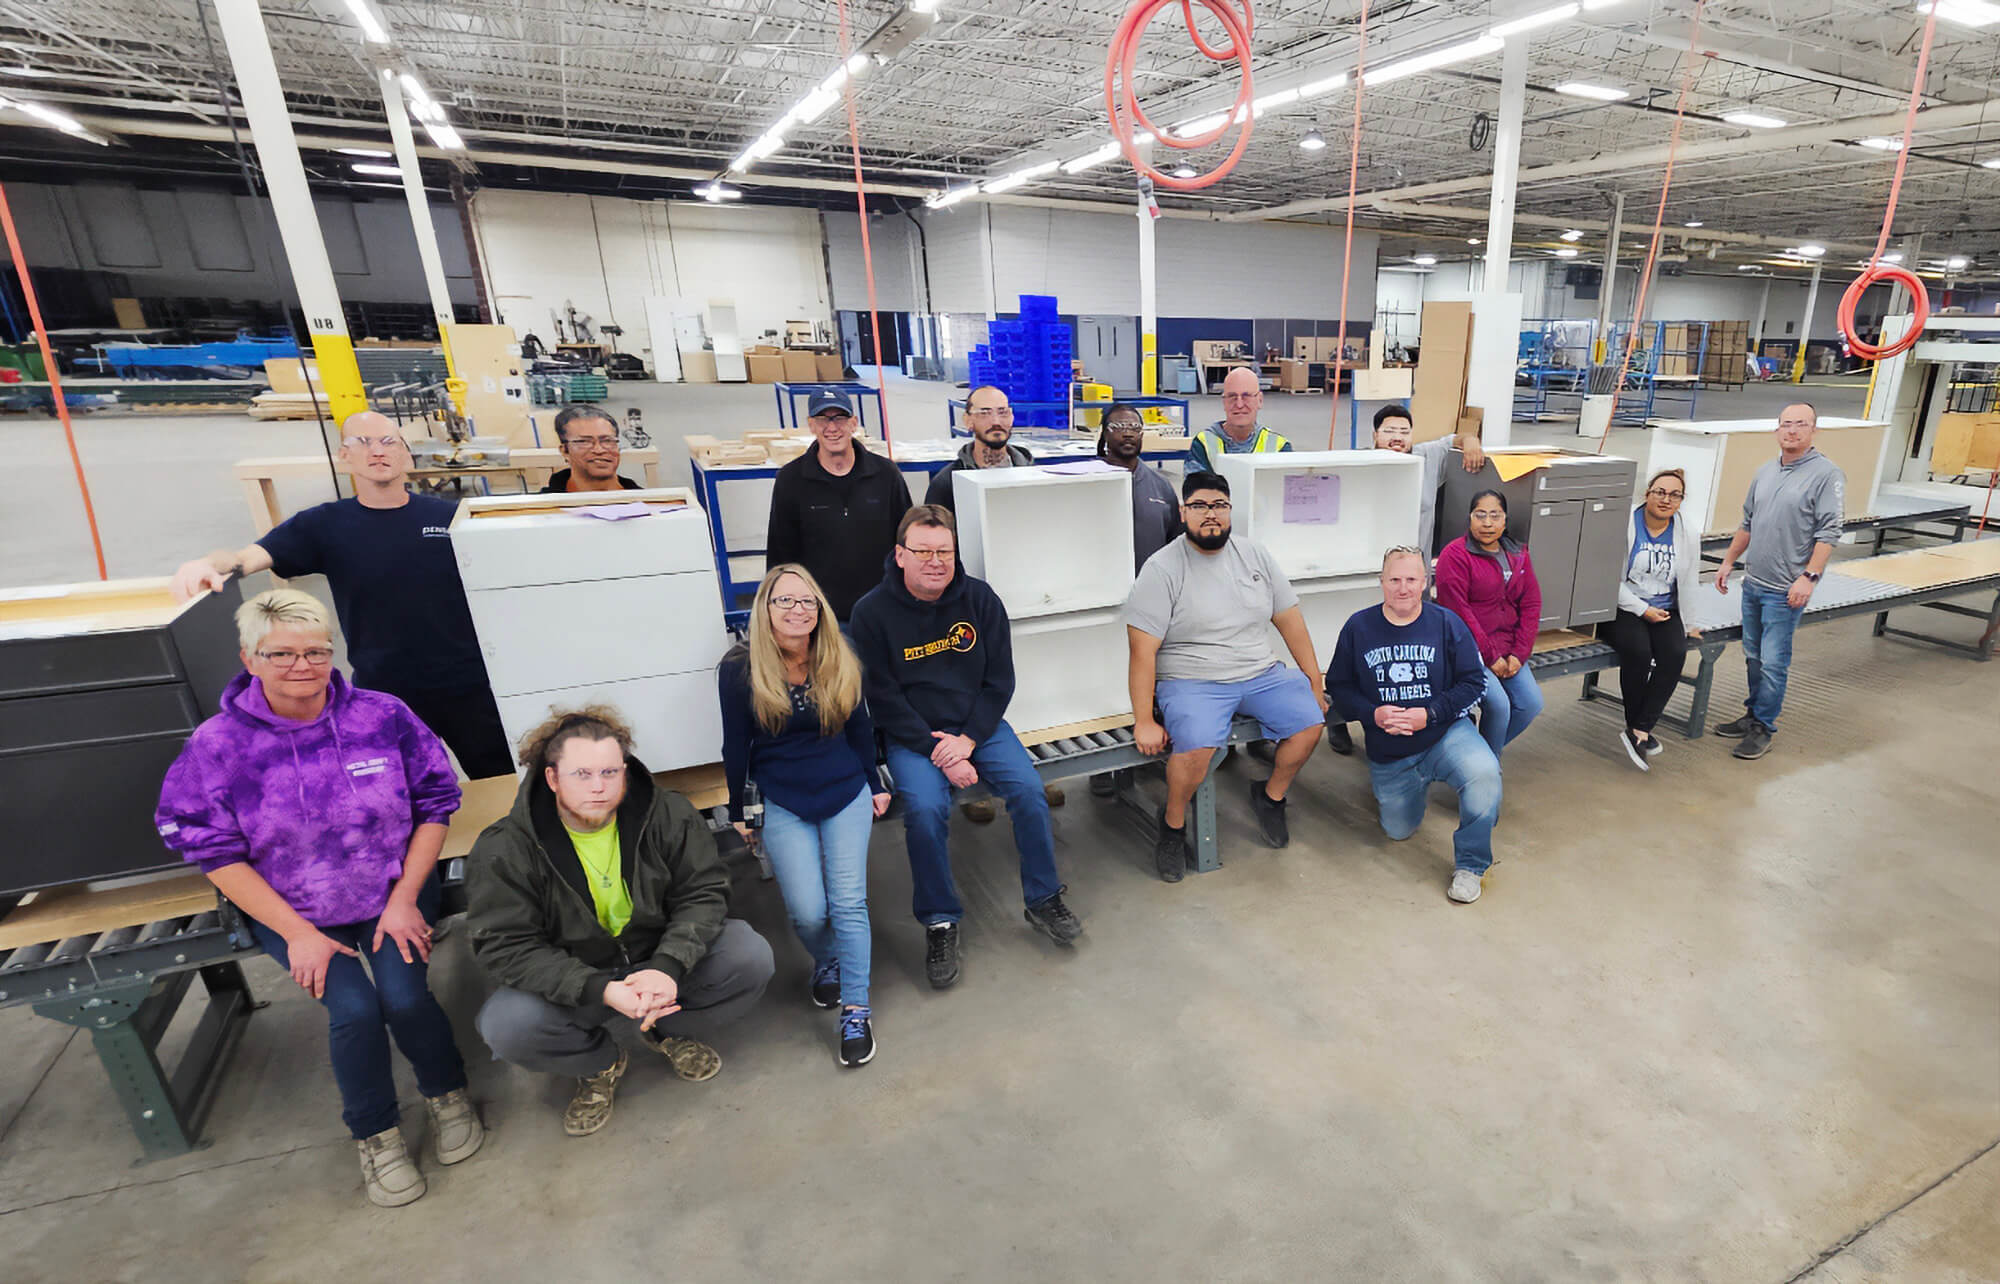 The cabinet makers at Dura Supreme Cabinetry's new Statesville, North Carolina factory.